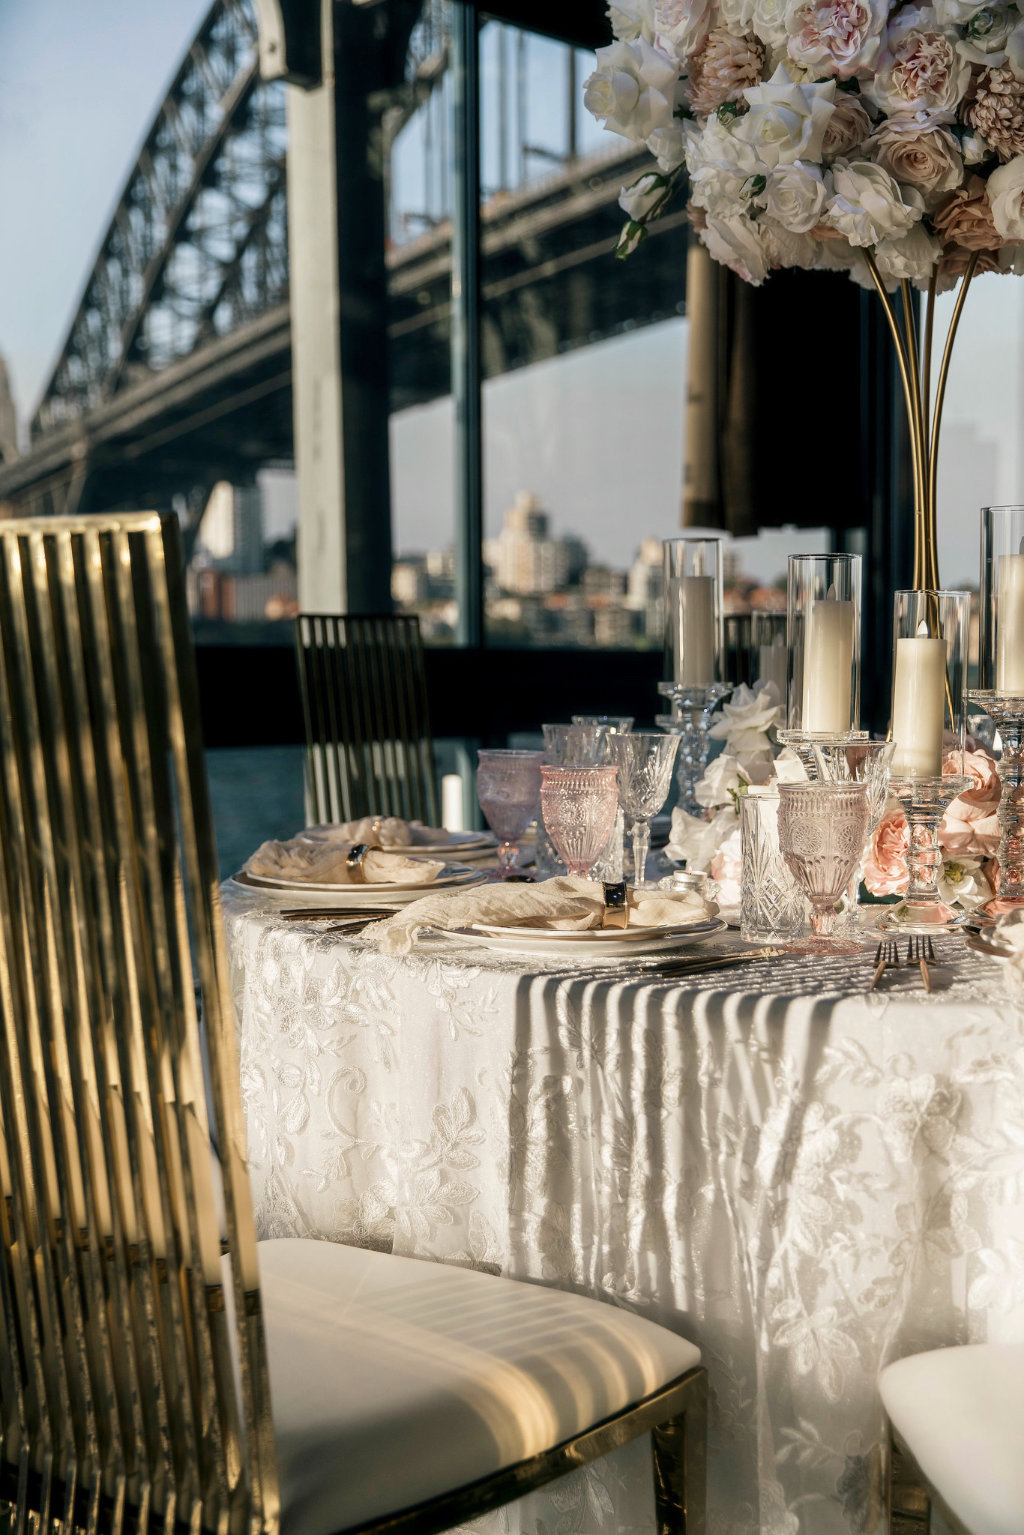 Luxury waterfront wedding styled shoot. Produced by Kate & Co, shot by Inlighten Photography.